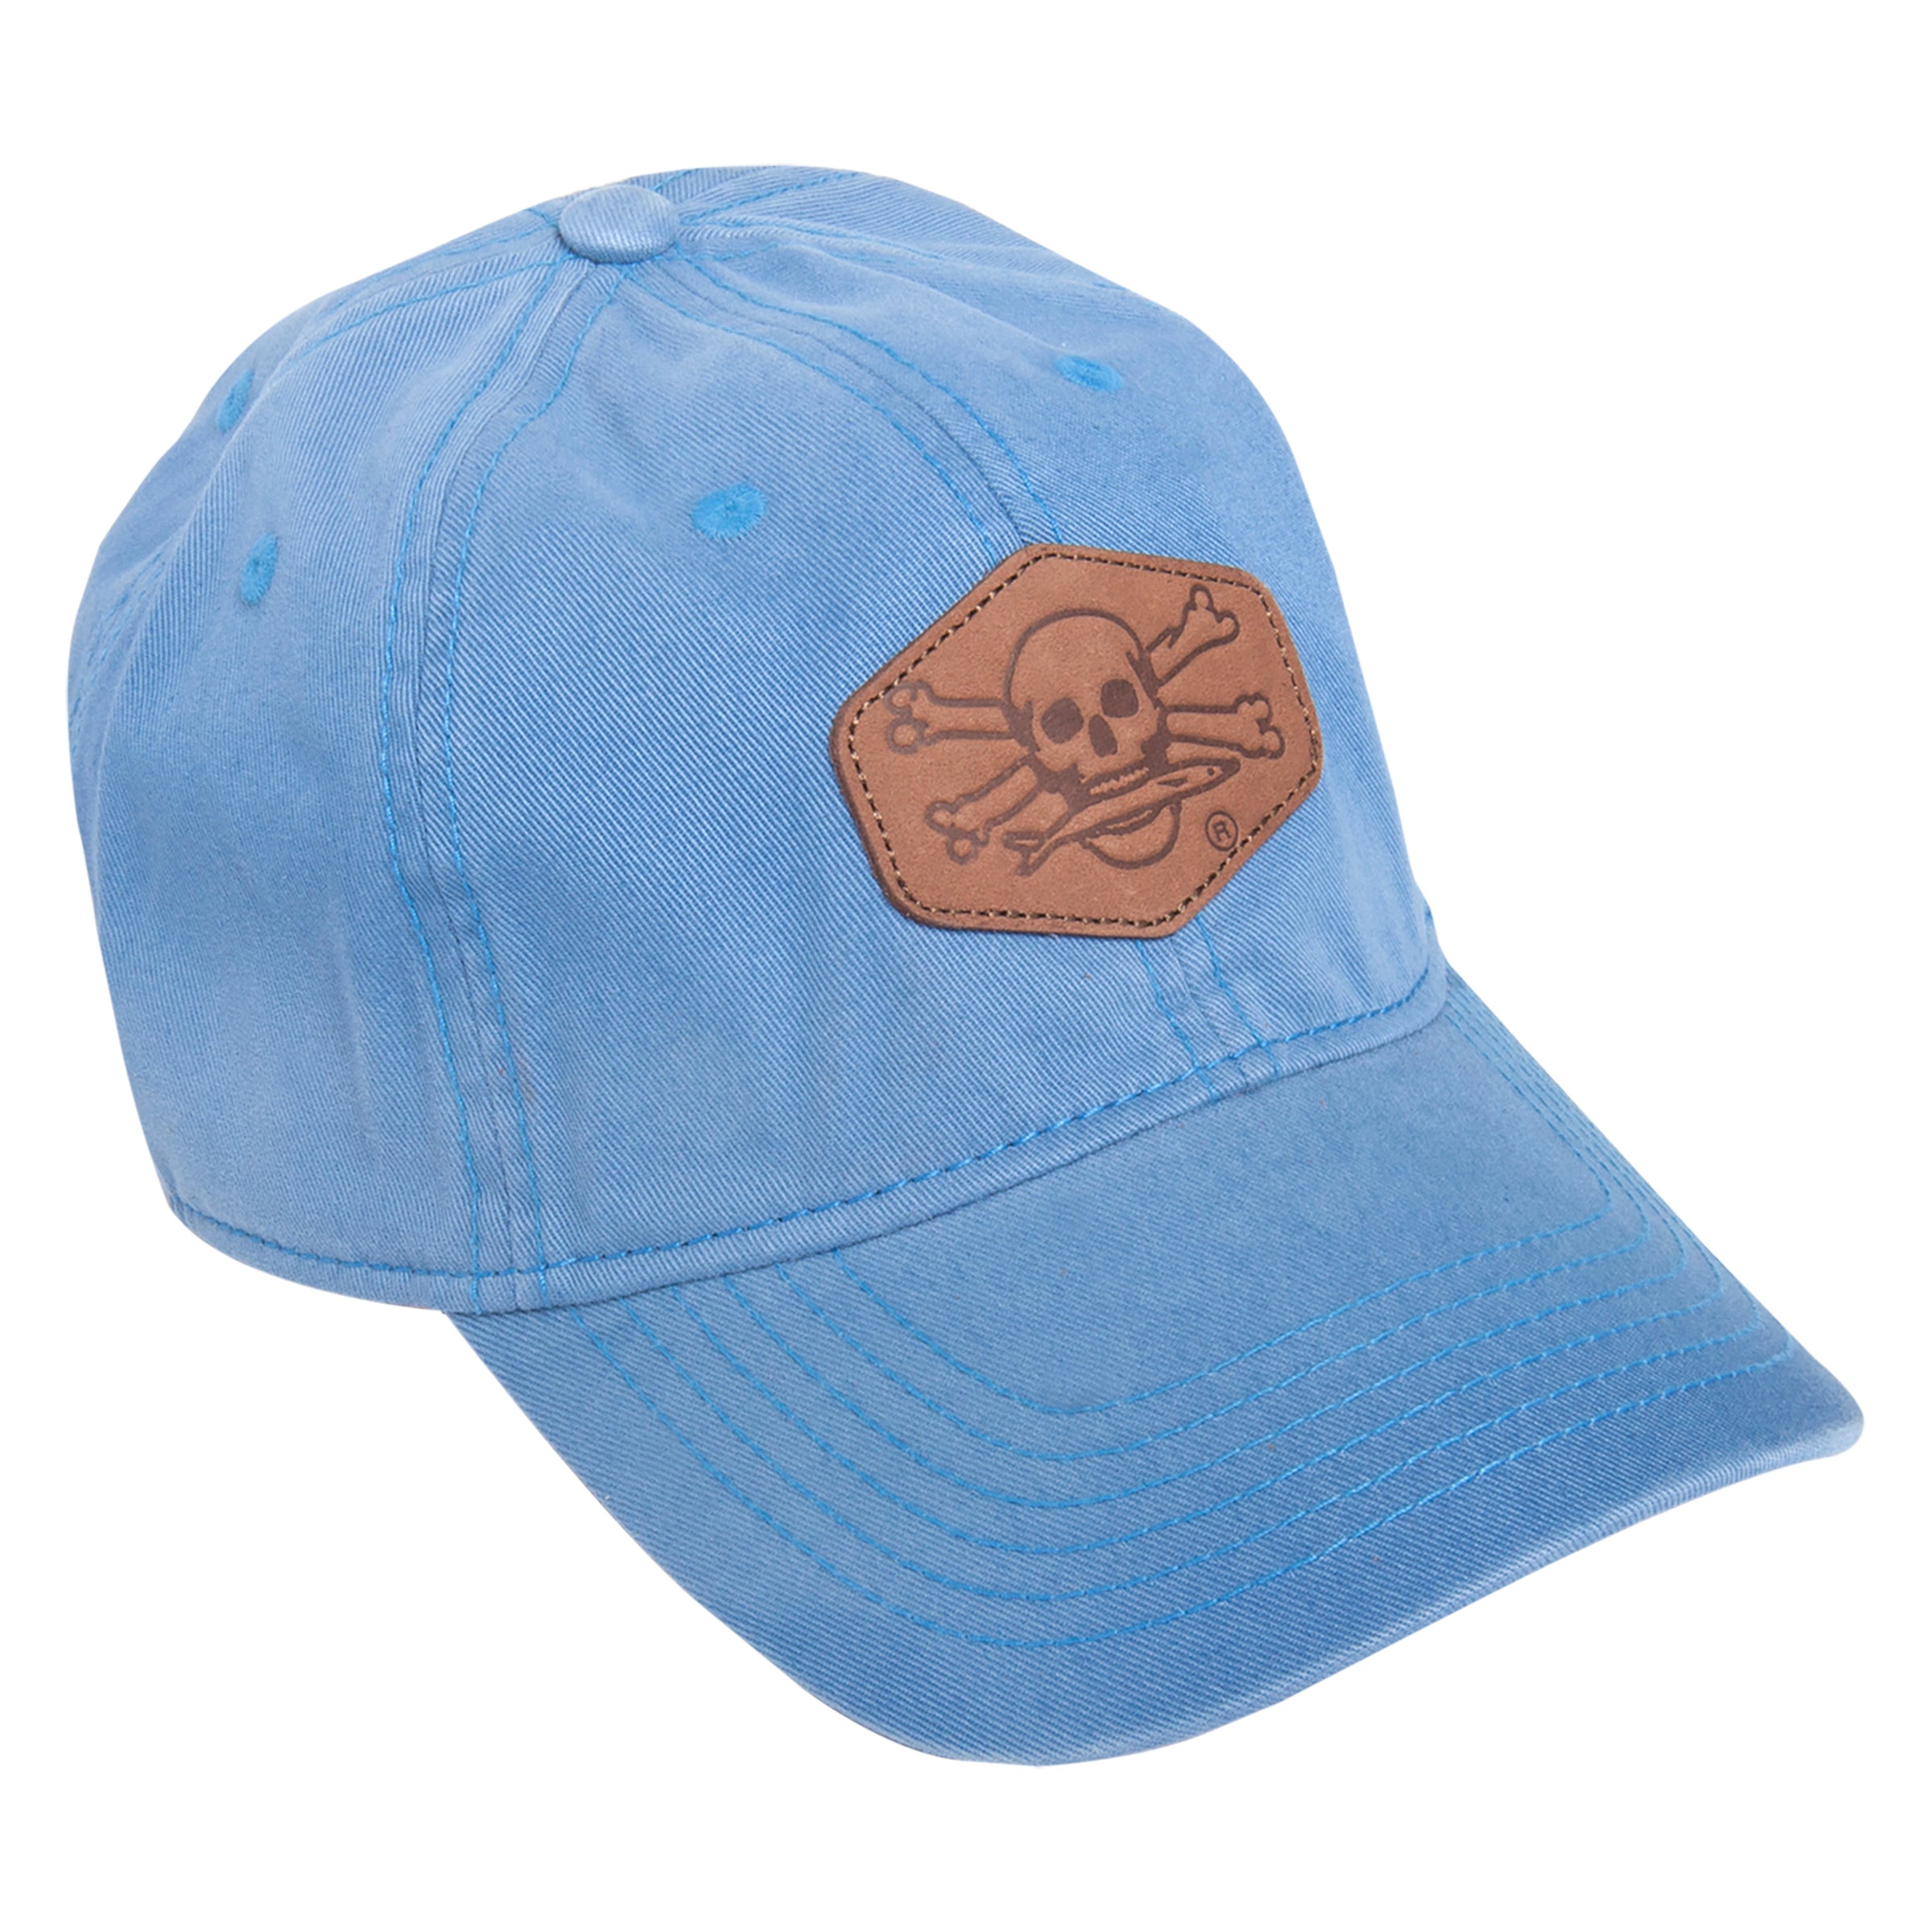 Blue Calcutta hat with leather patch